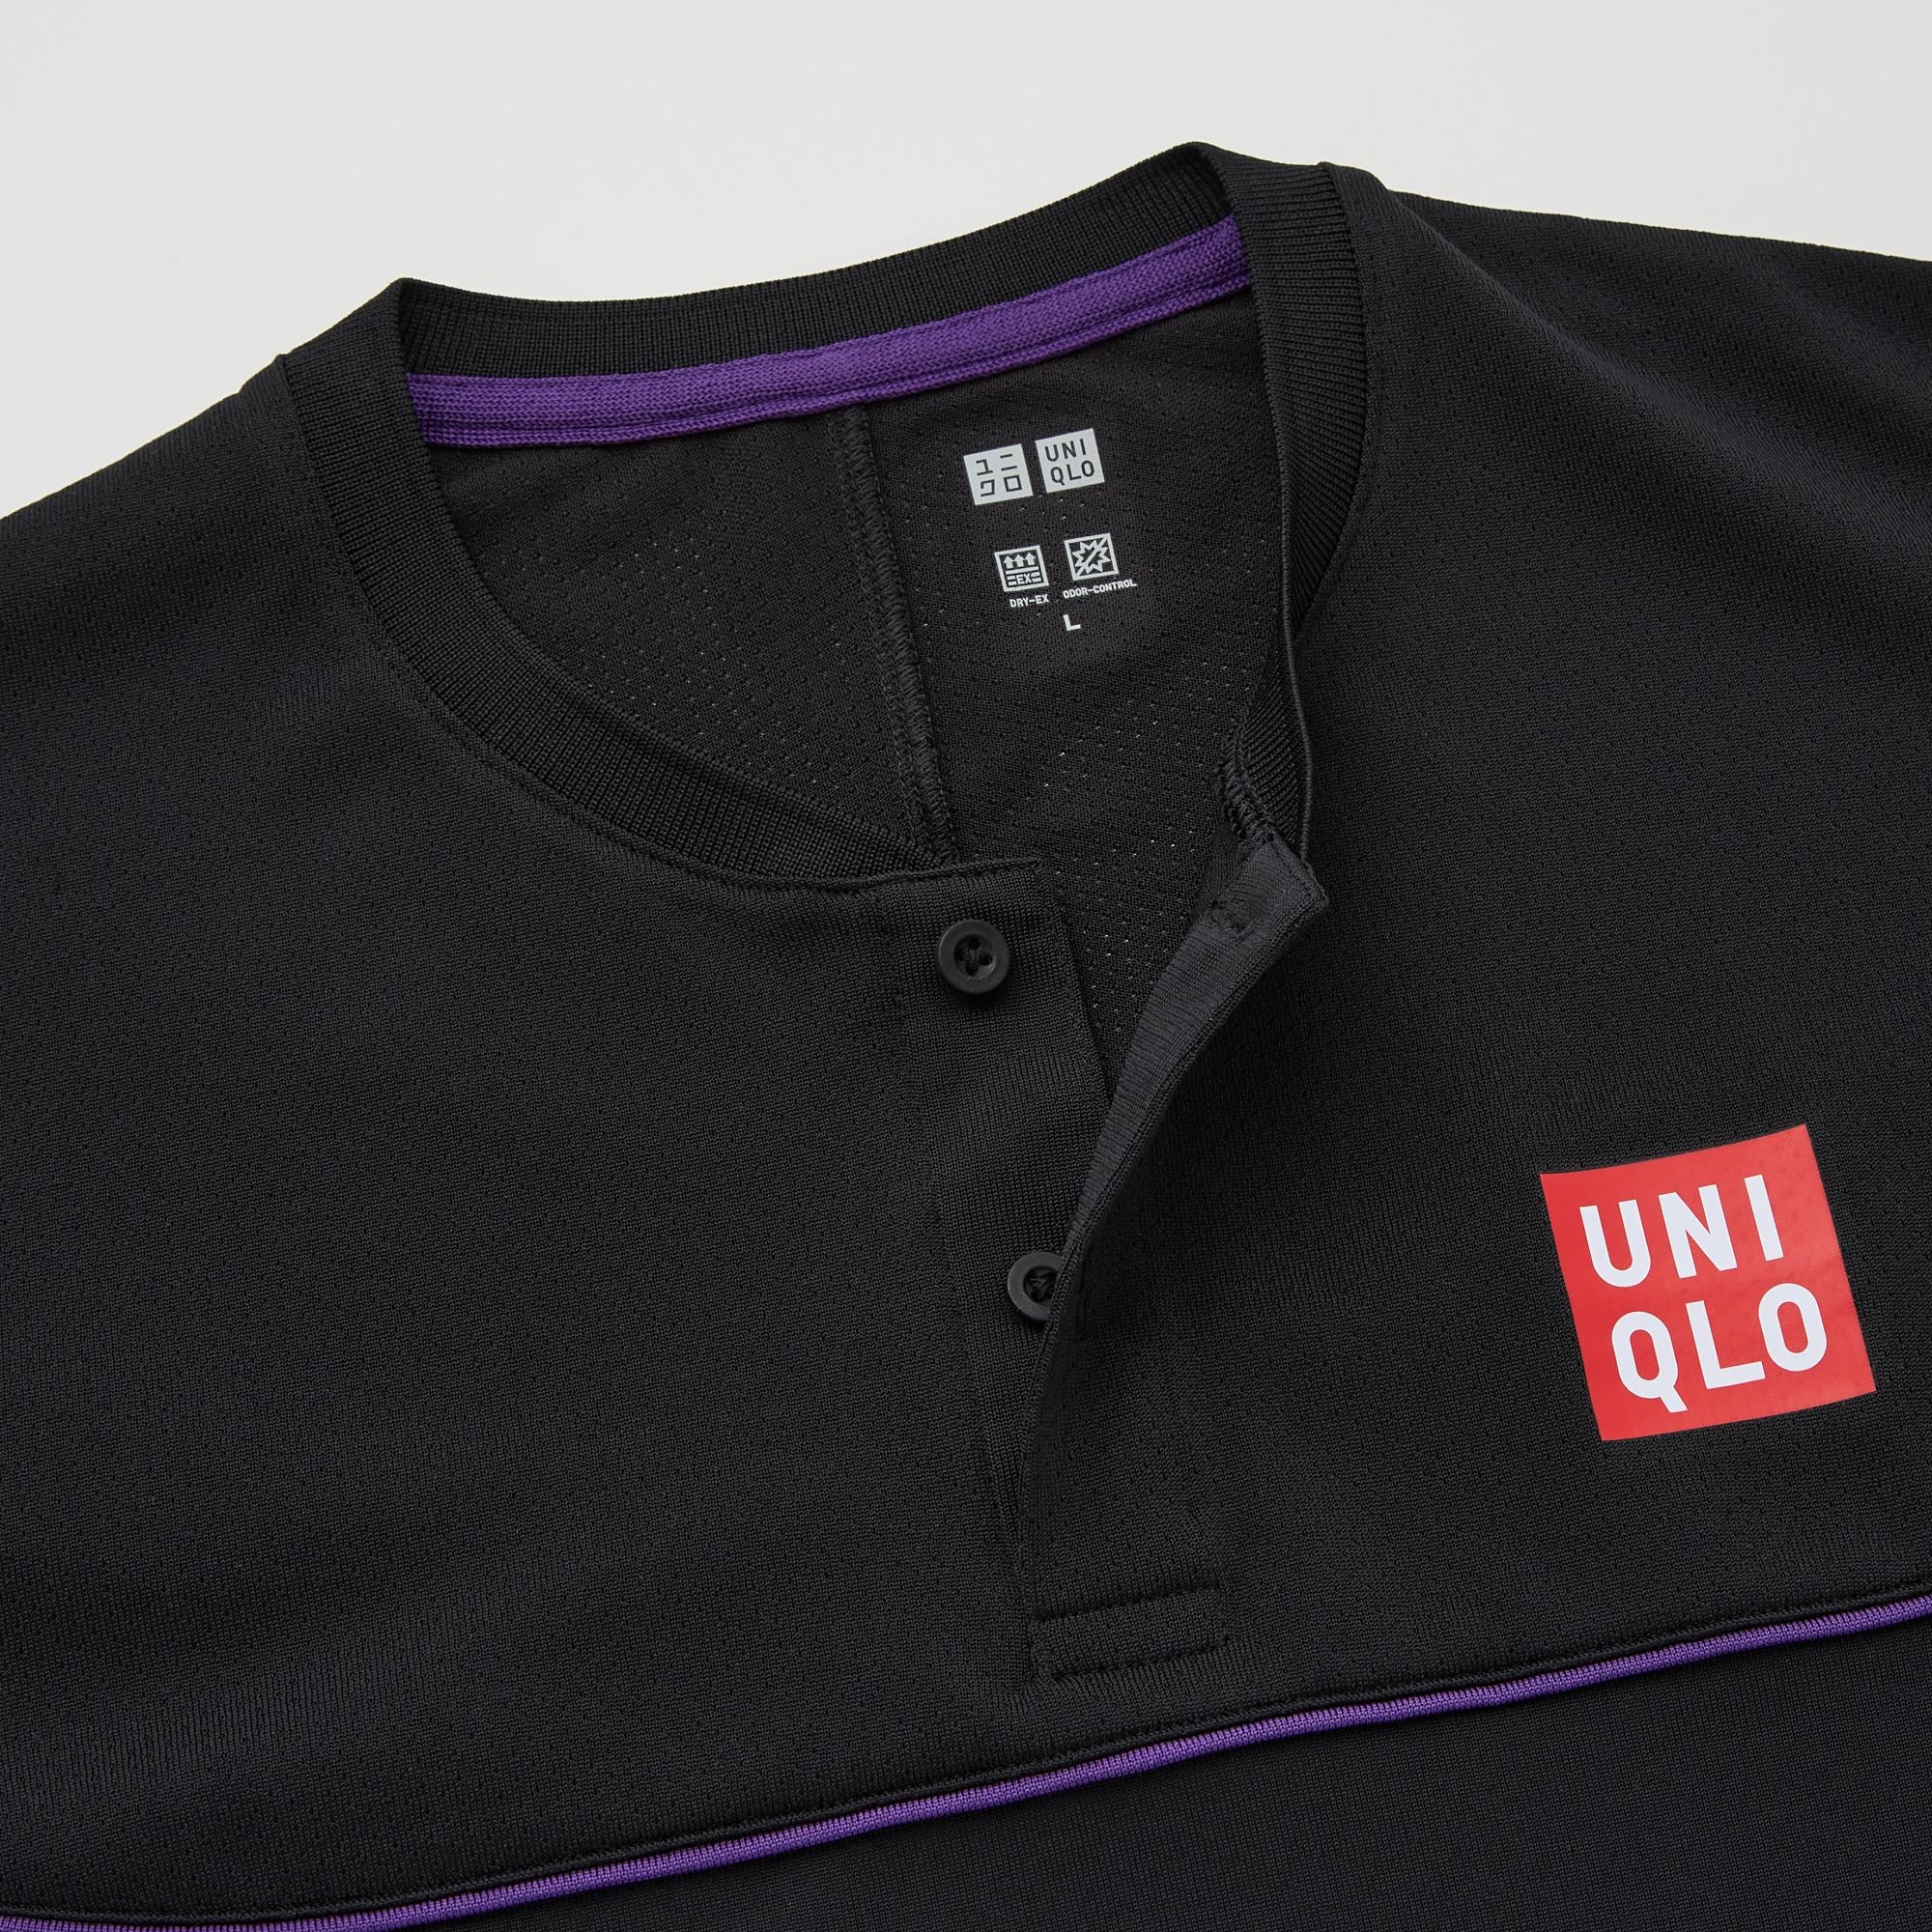 Roger Federers 5Piece Uniqlo Tennis Outfit Is on Sale for 120